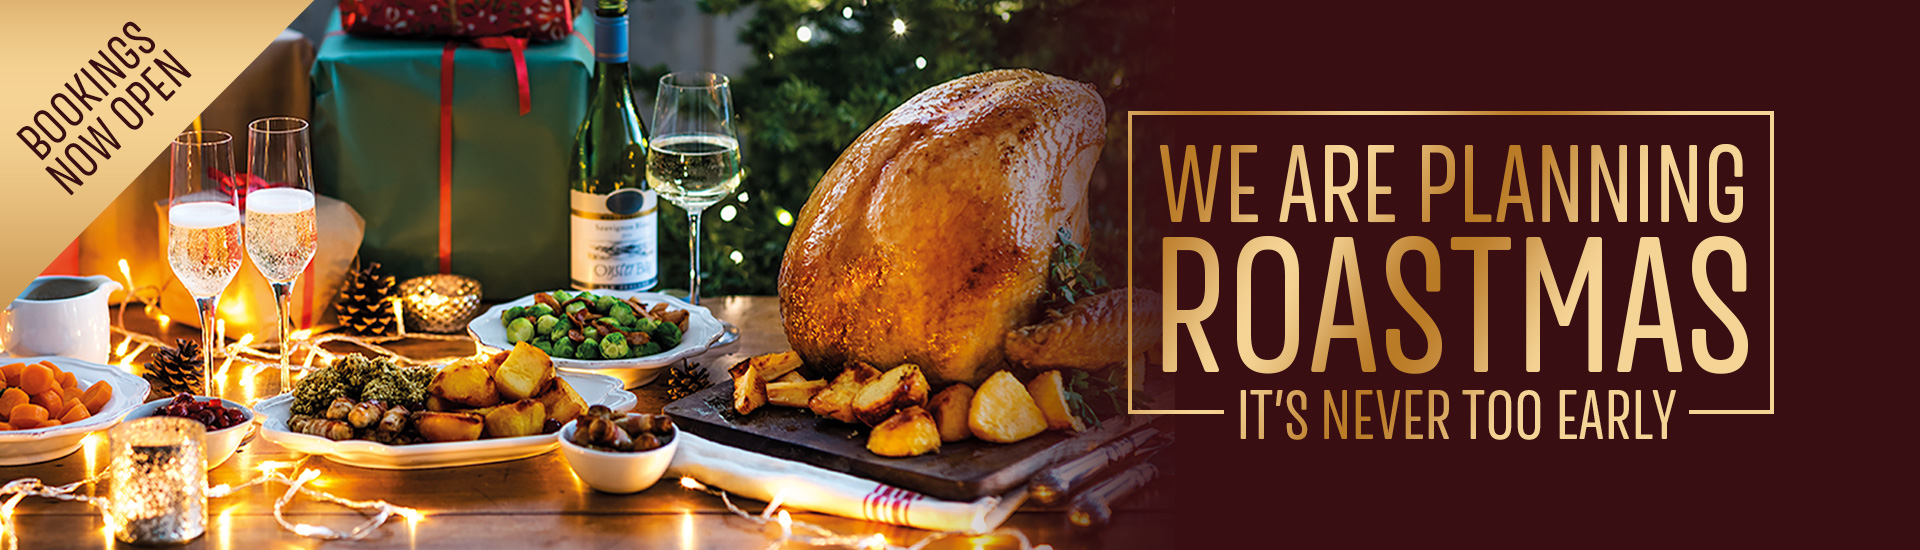 Christmas 2022 at your local Toby Carvery Macclesfield | Home of the Roast